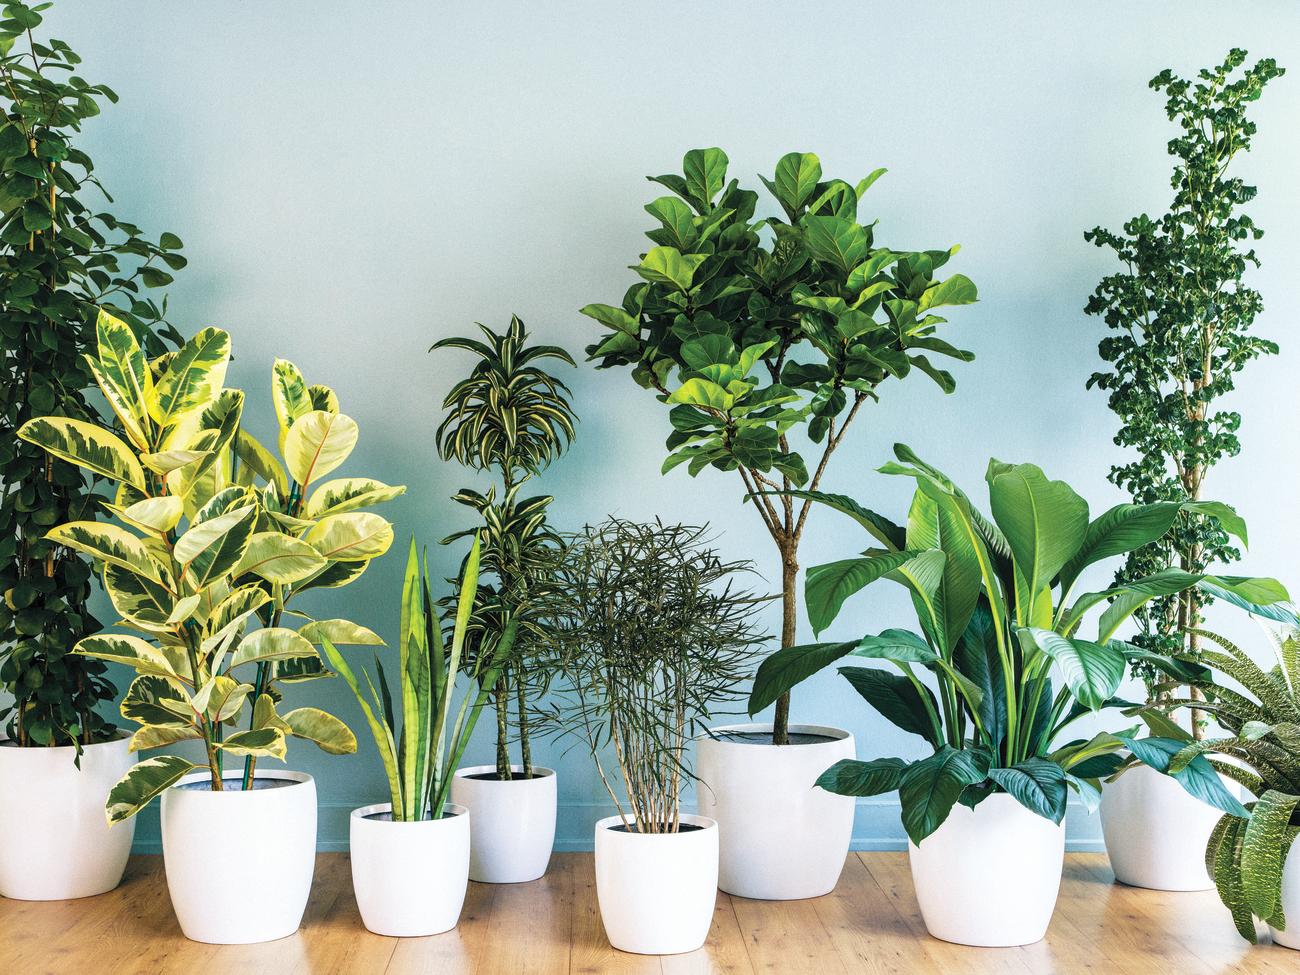 Easy Ways to Keep Houseplants Watered on Vacation